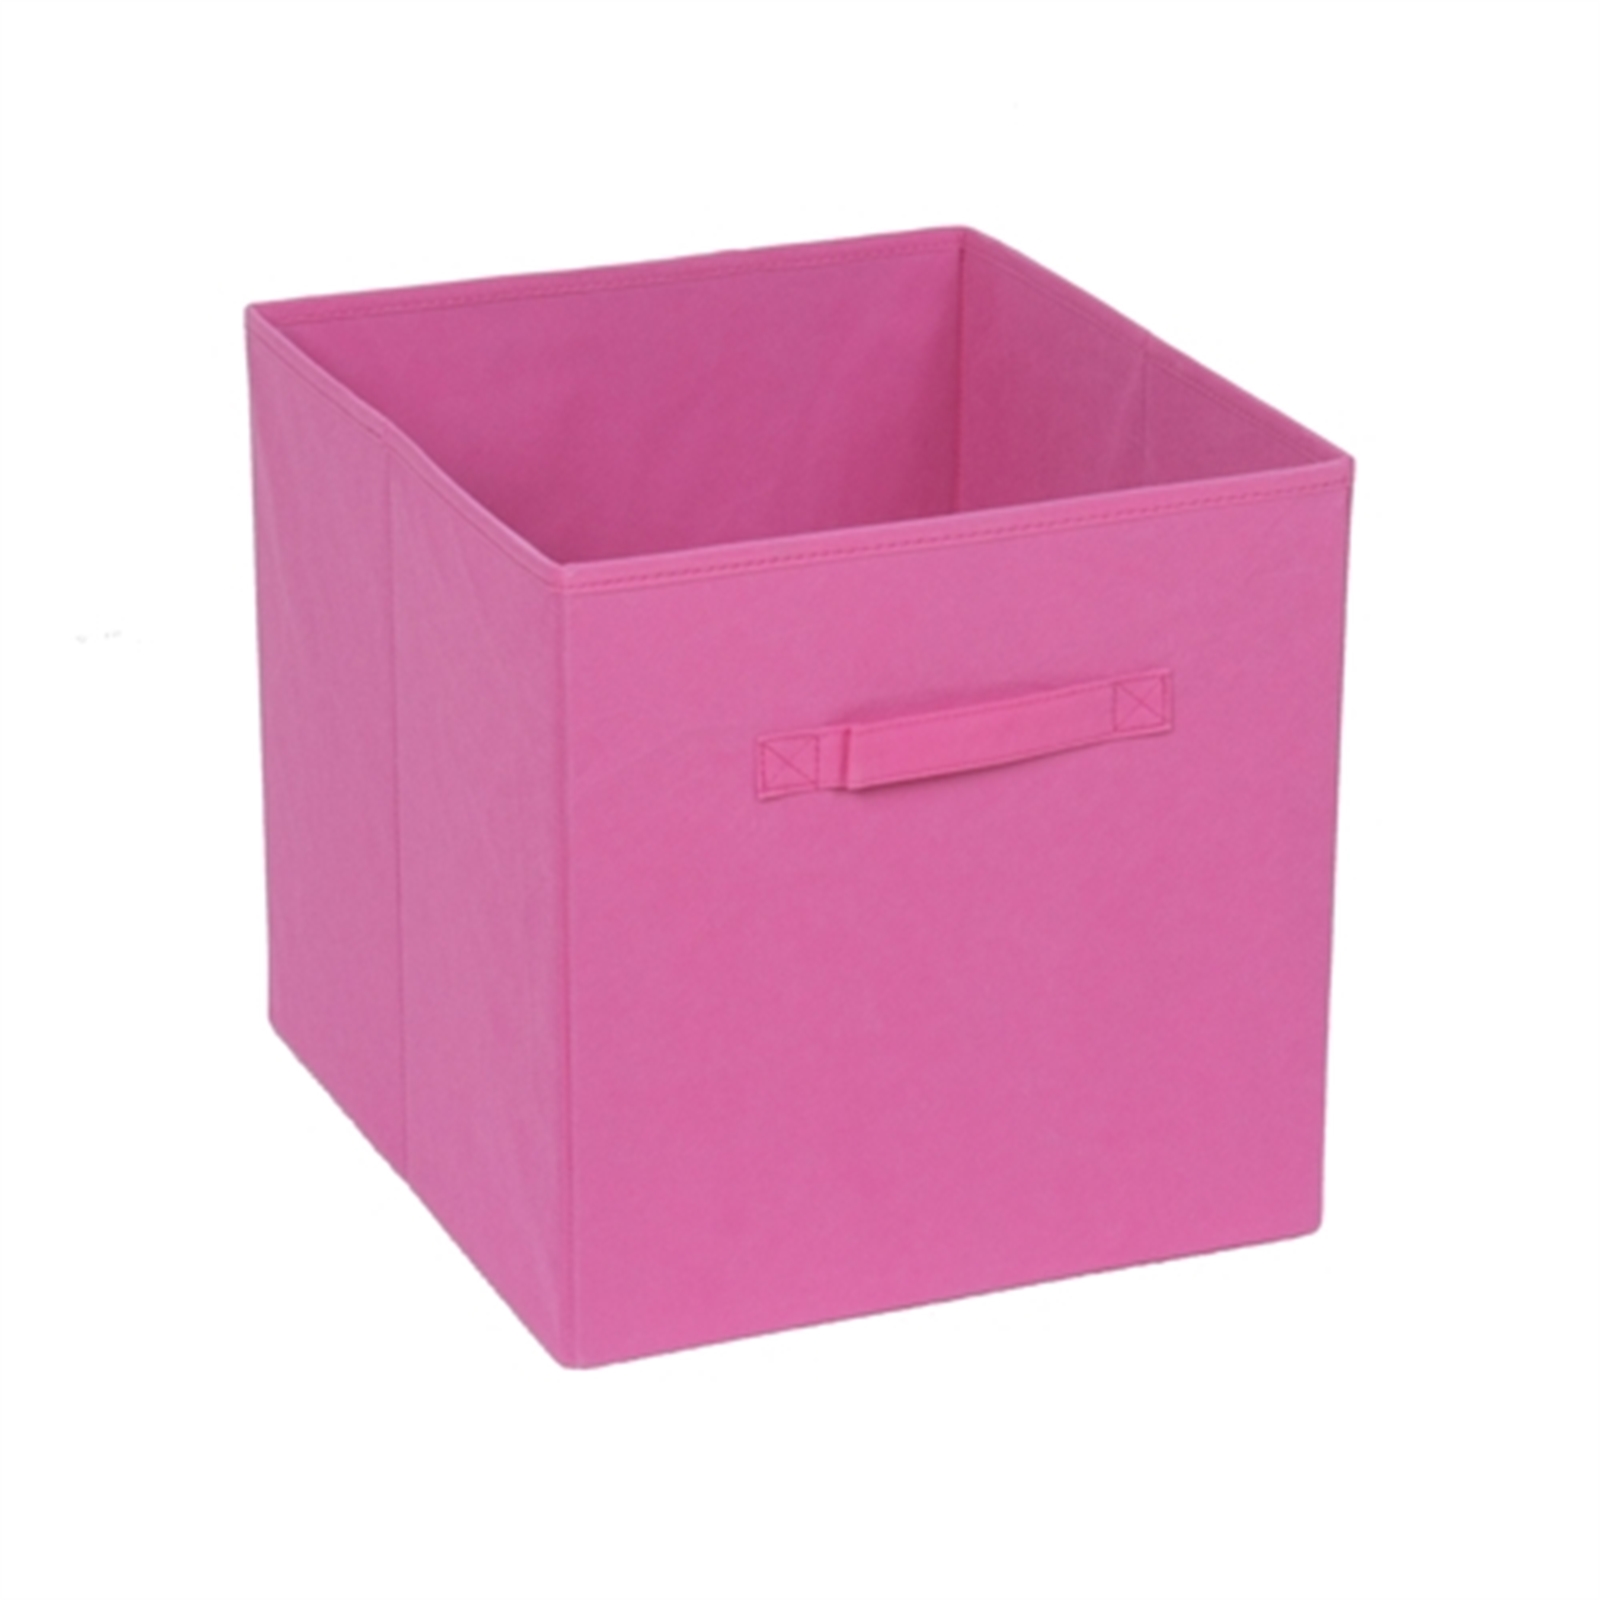 Clever Cube 330 x 330 x 370mm Pink Fabric Insert